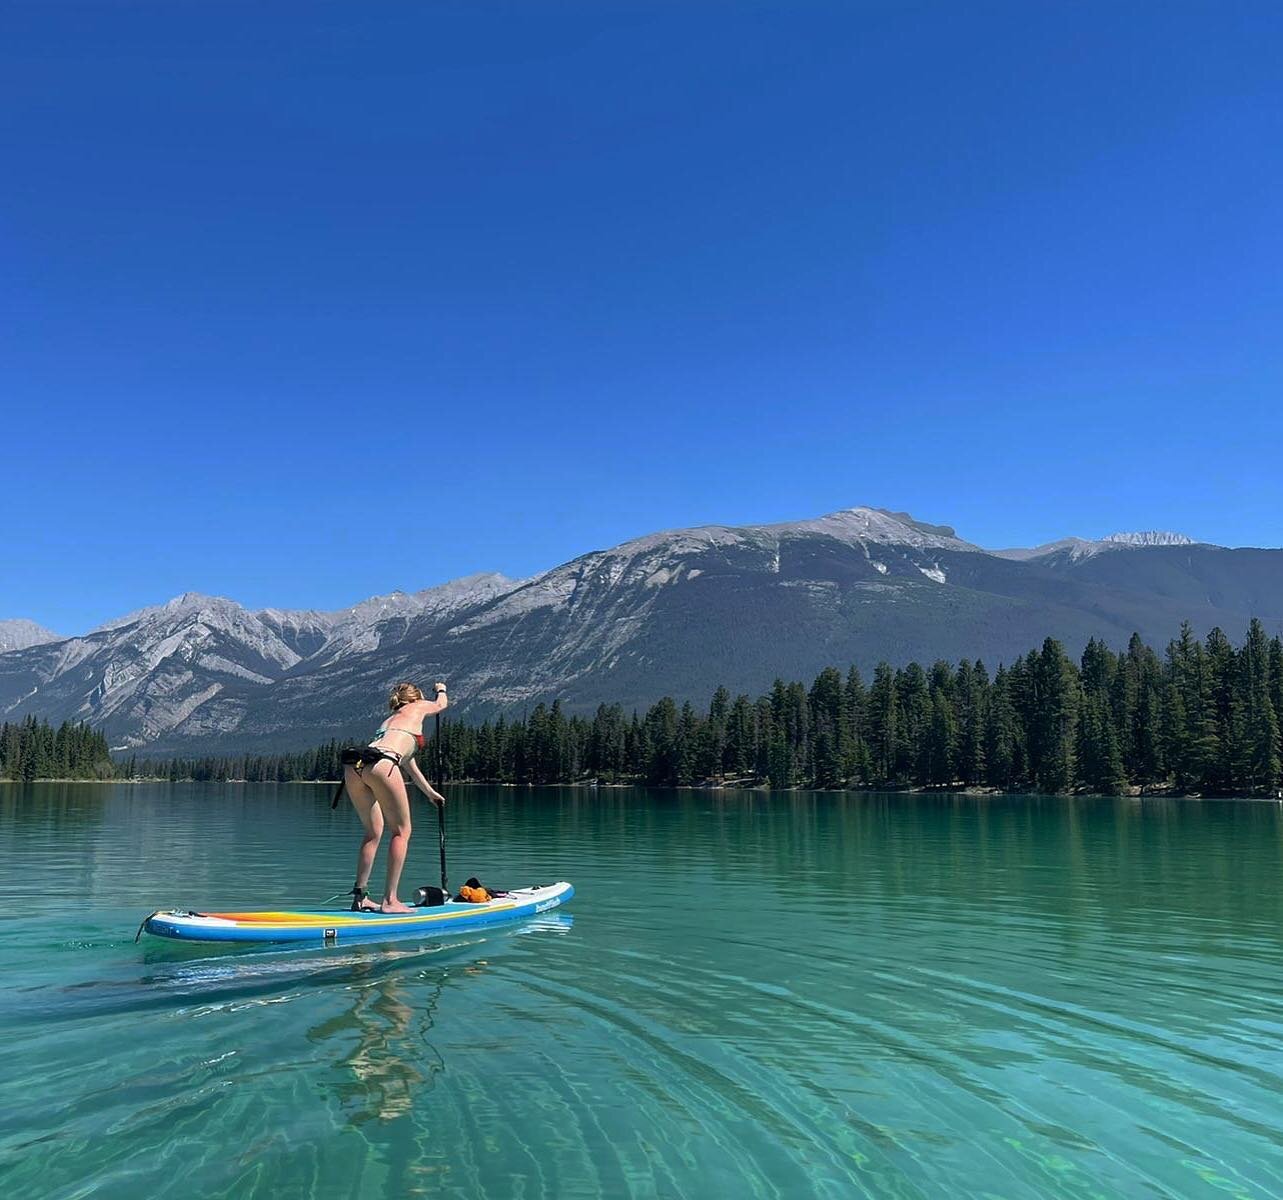 Stand up paddle board rentals and lessons start on Saturday 11am to 6pm. 

We had planned to only be open for the weekend but with this unexpected heat dome might see us open all week long&hellip;follow us here for specials, hours, events and weather